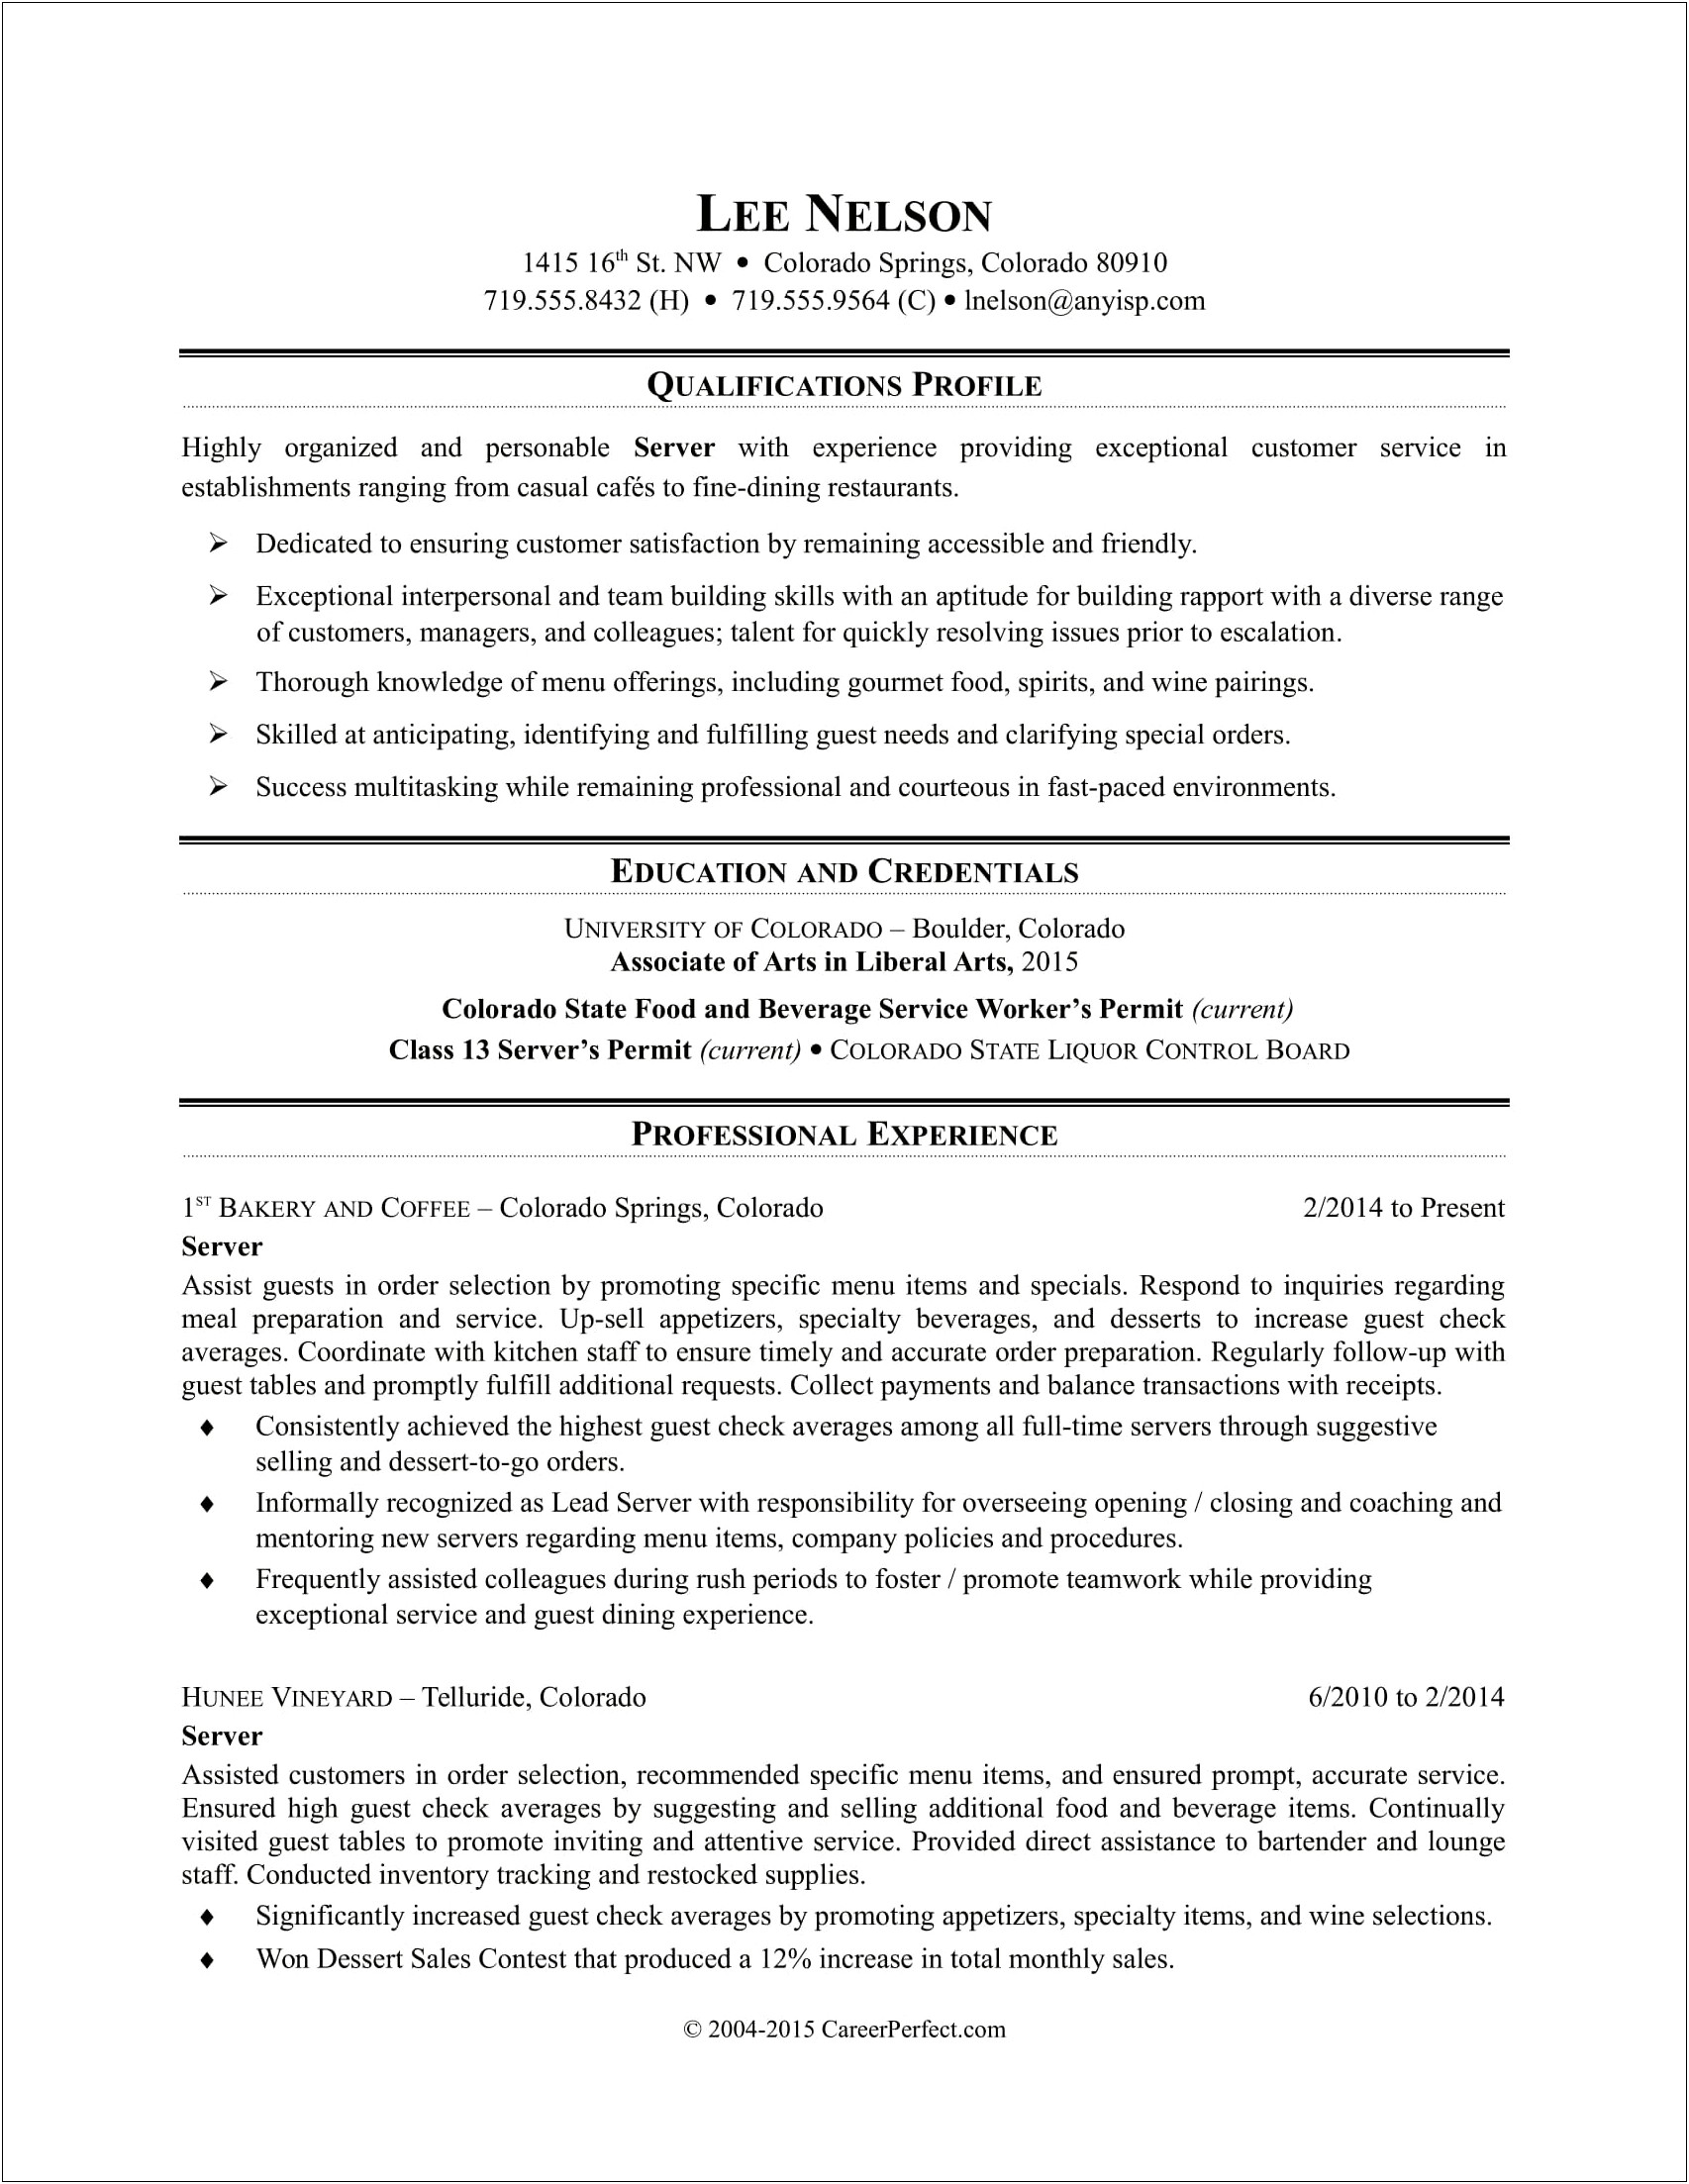 Sample Resume For Lead Patient Care Hostess